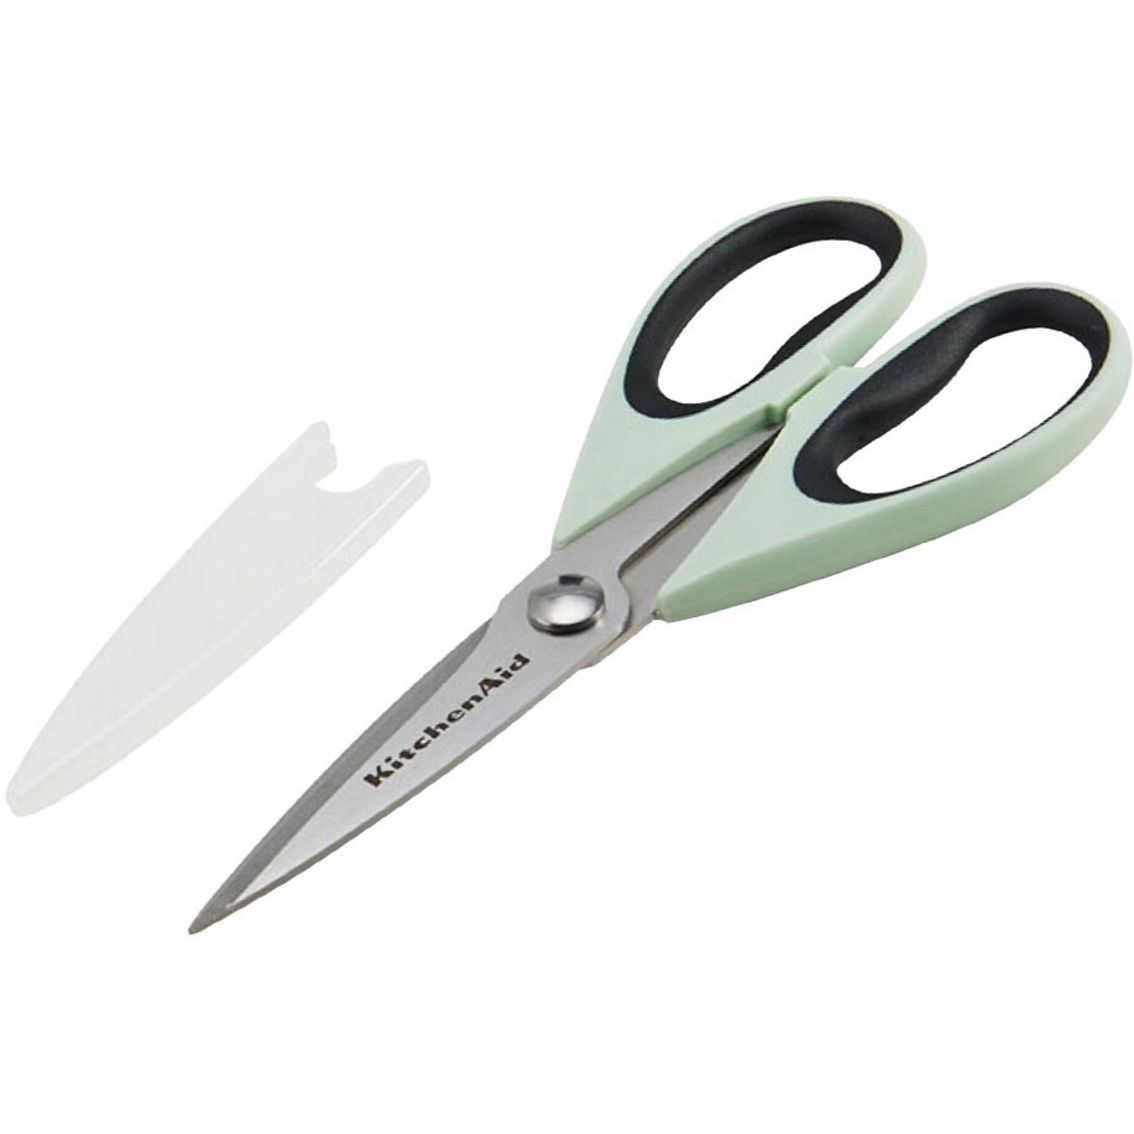 Kitchenaid Classic Shears With Soft Grip, Pistachio, Cutlery, Household